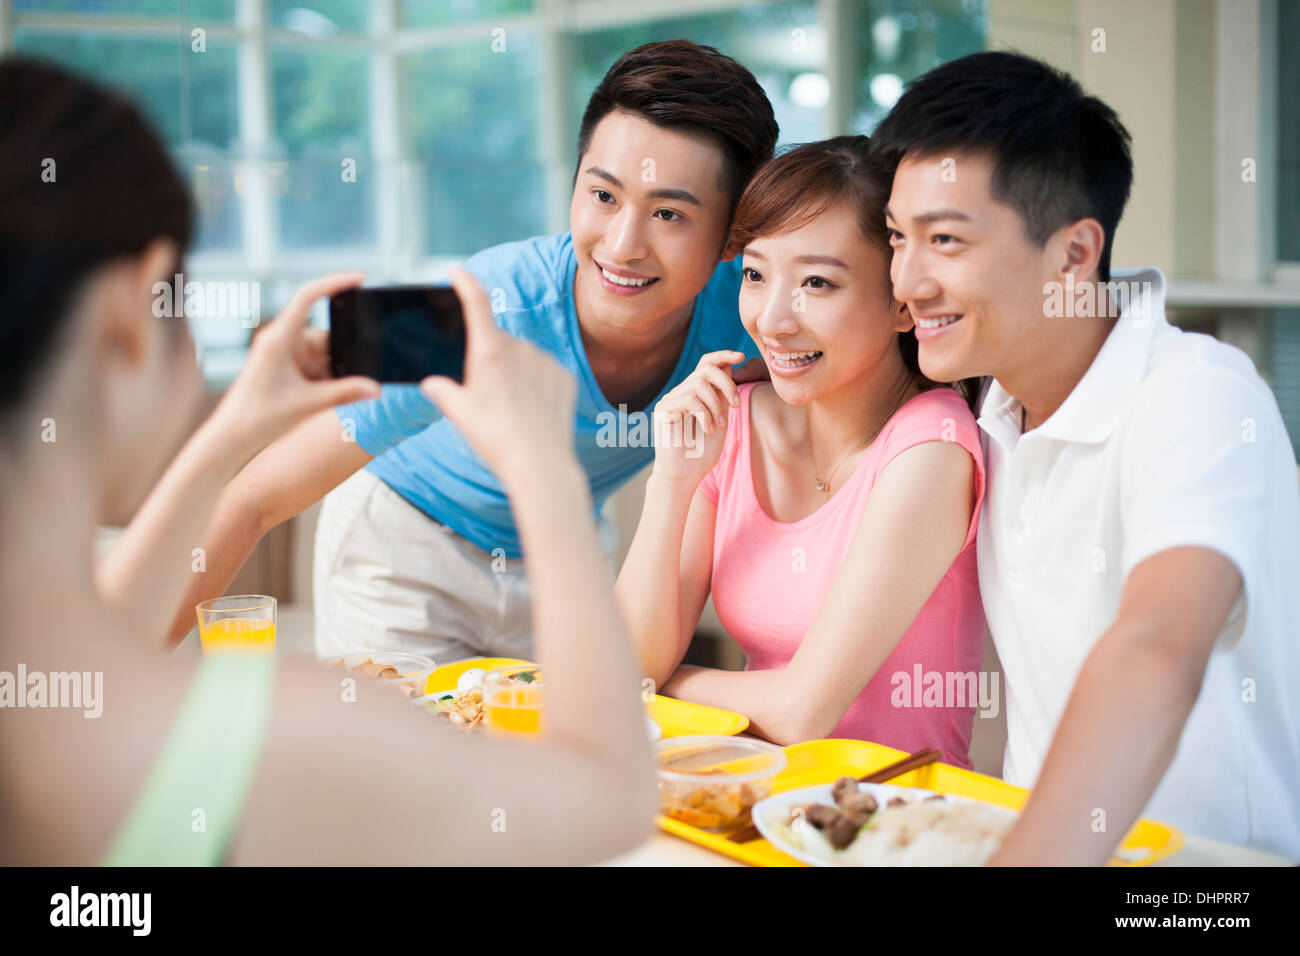 Young adults taking pictures in restaurant Stock Photo